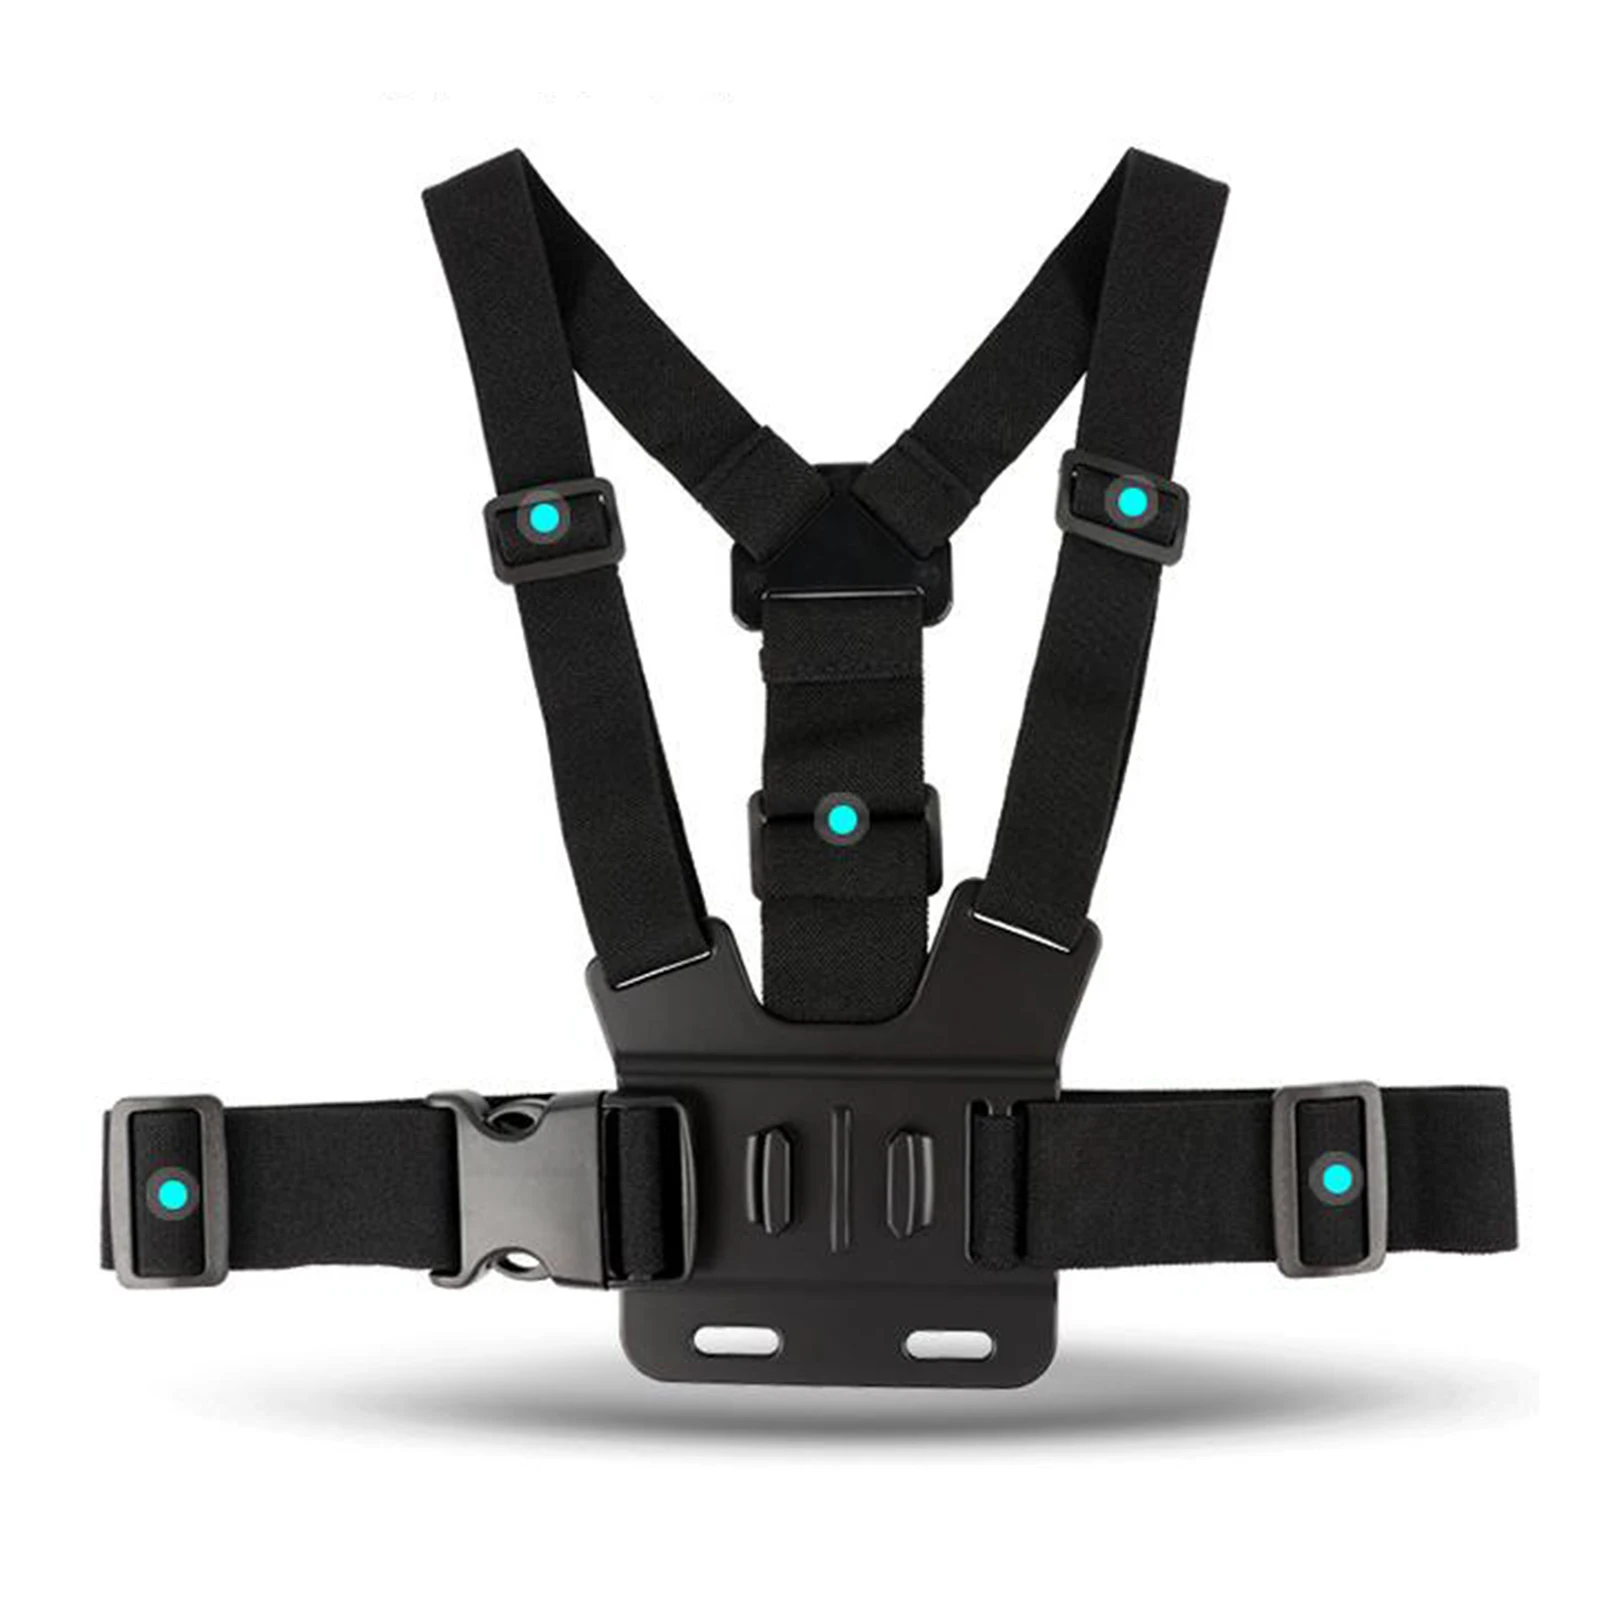 Mobile Phone Body Chest Mount Harness Strap Holder Hands Free Hand Shooting Chest Fixed Straps for iPhone